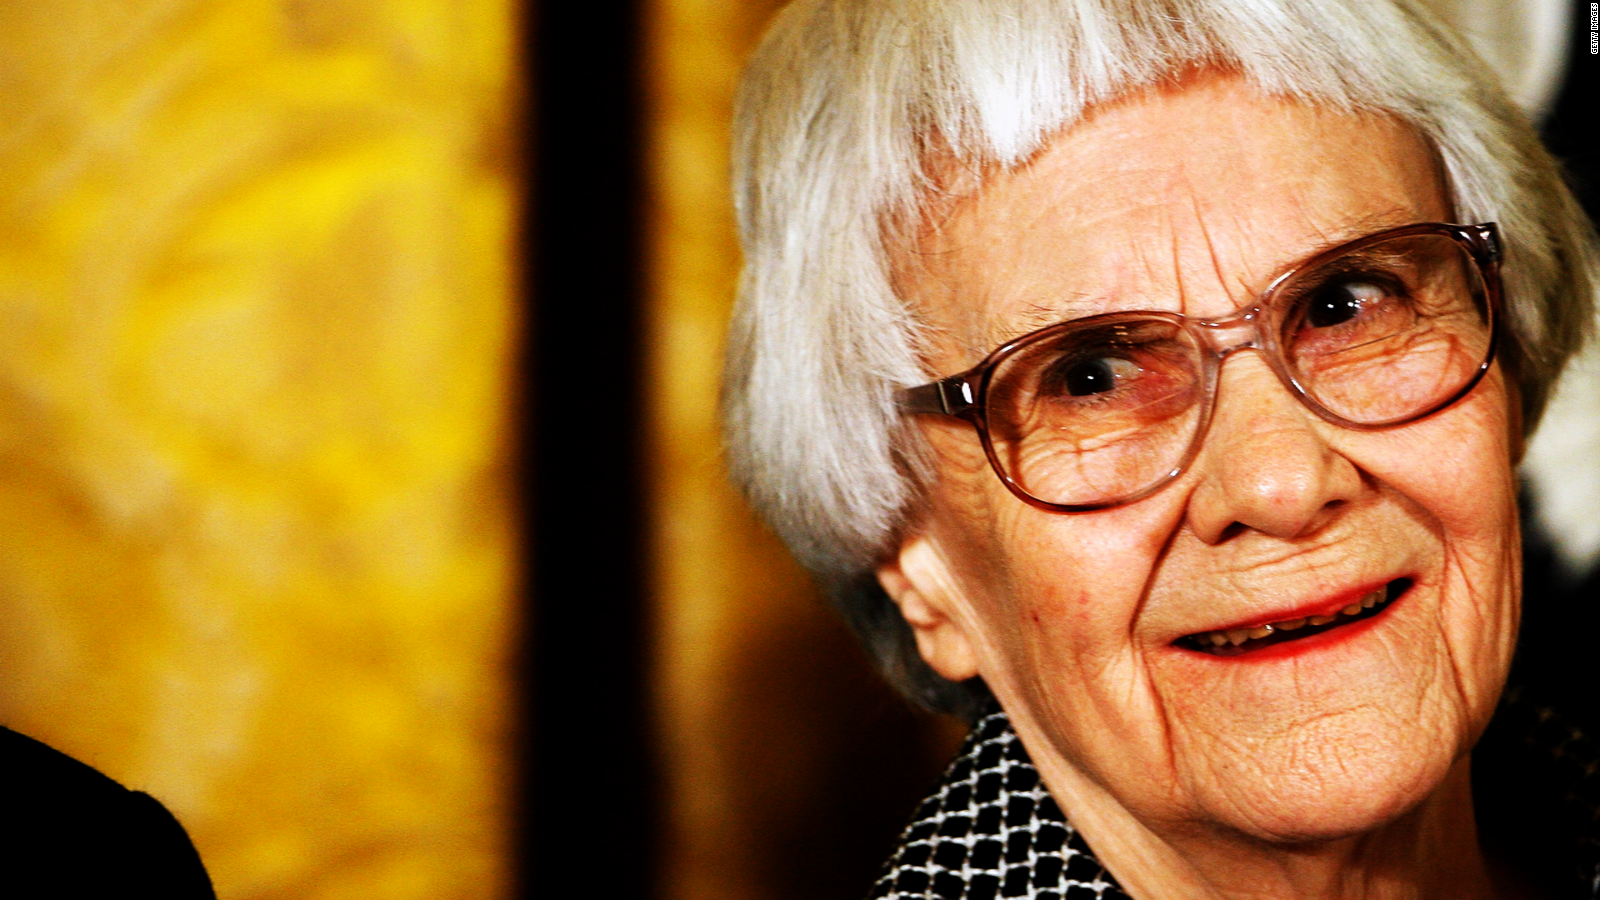 What awards did Harper Lee win?